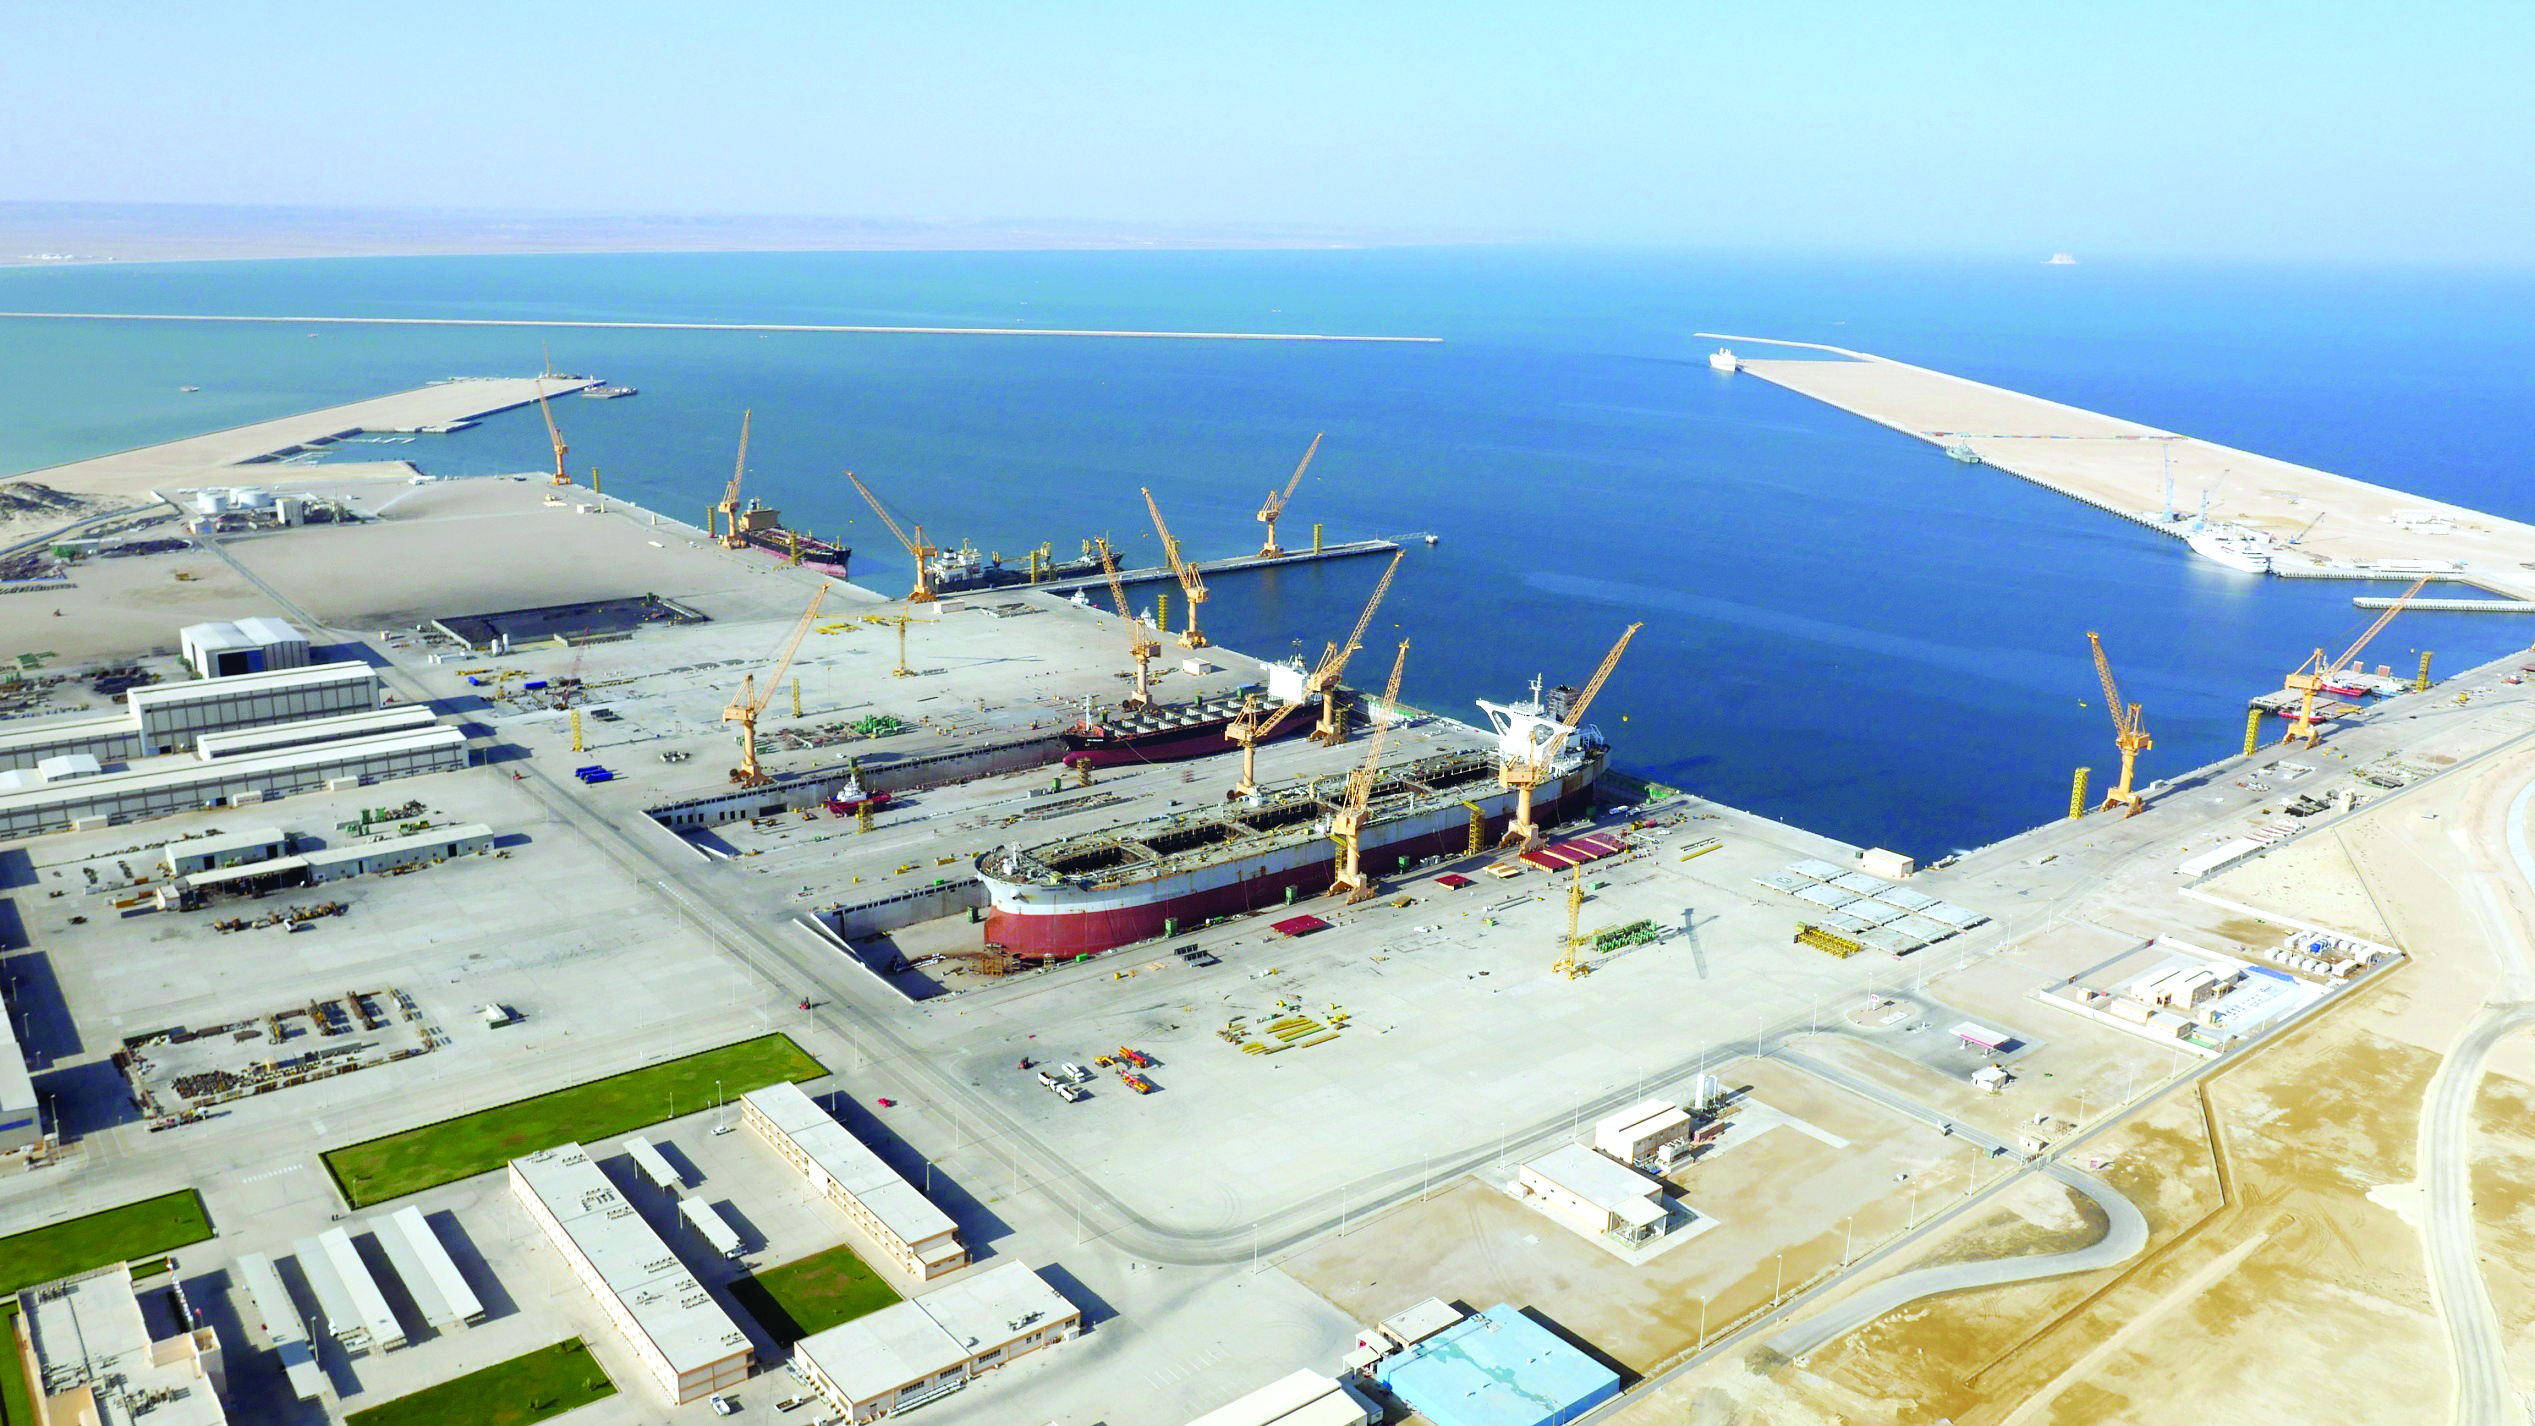 Oman-Qatar bus unit, Chinese investment to enhance attractiveness of Duqm